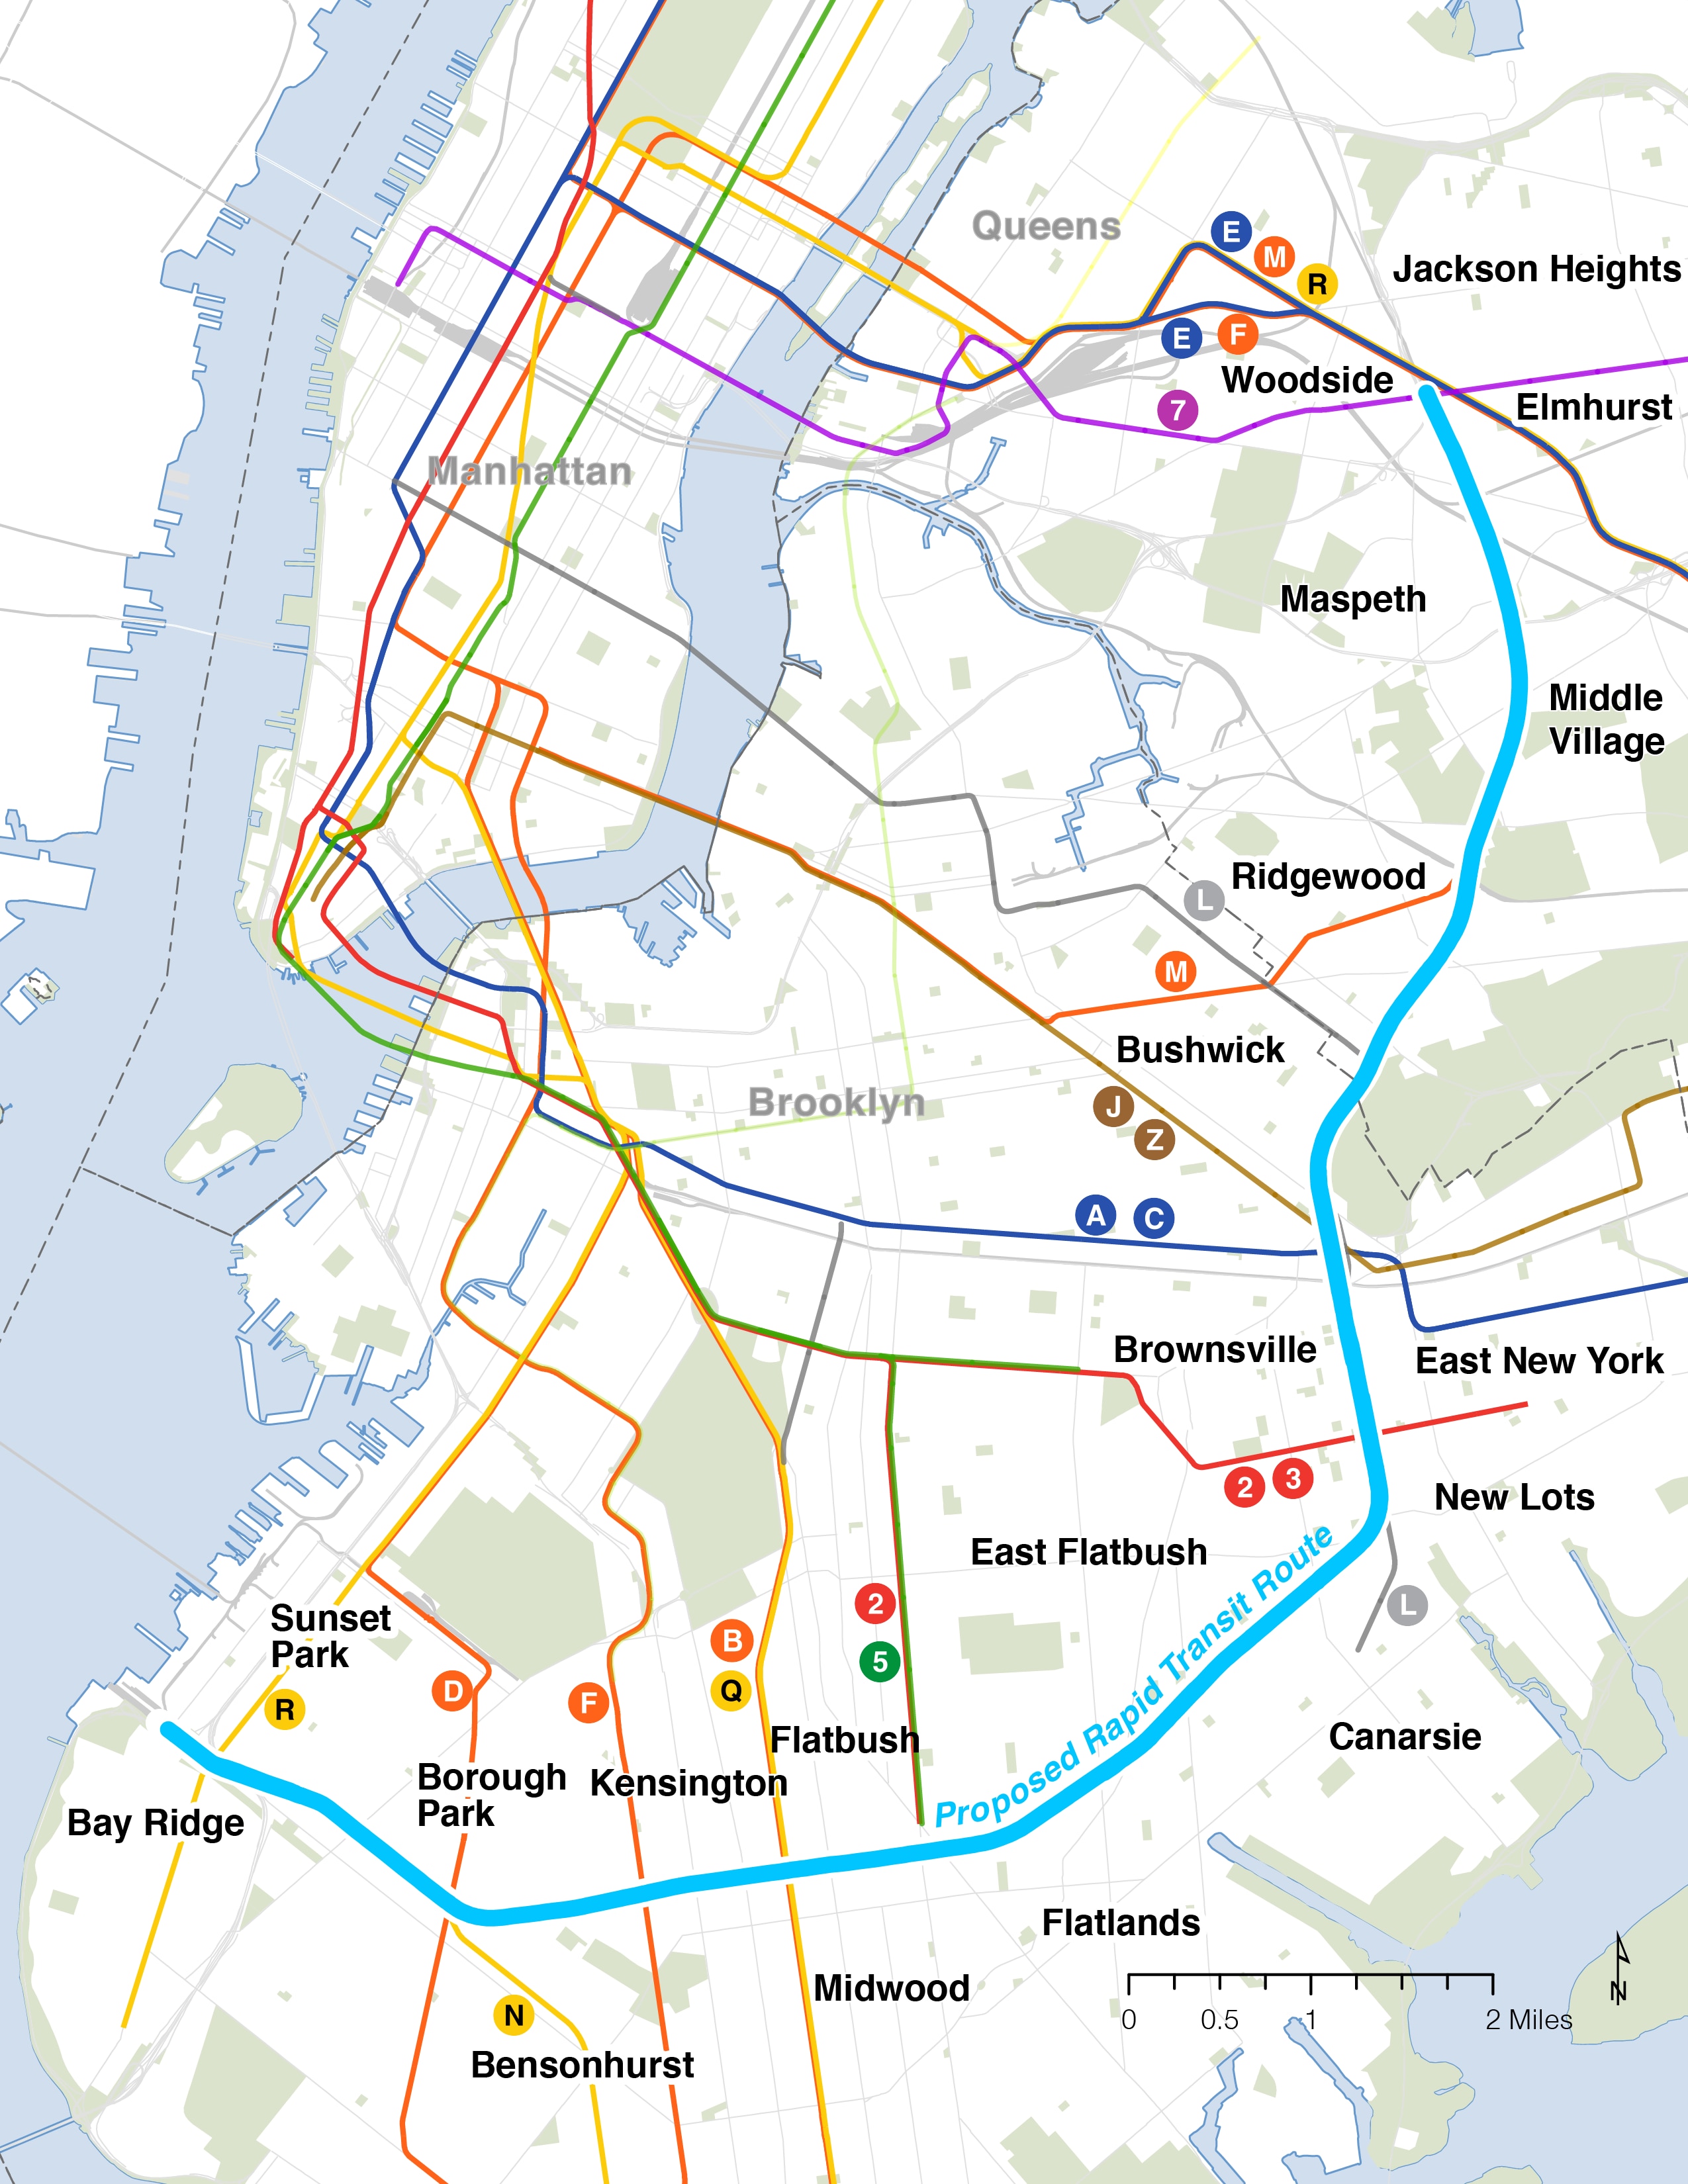 MTA to Hold Virtual Public Town Hall Meeting on Interborough Express 